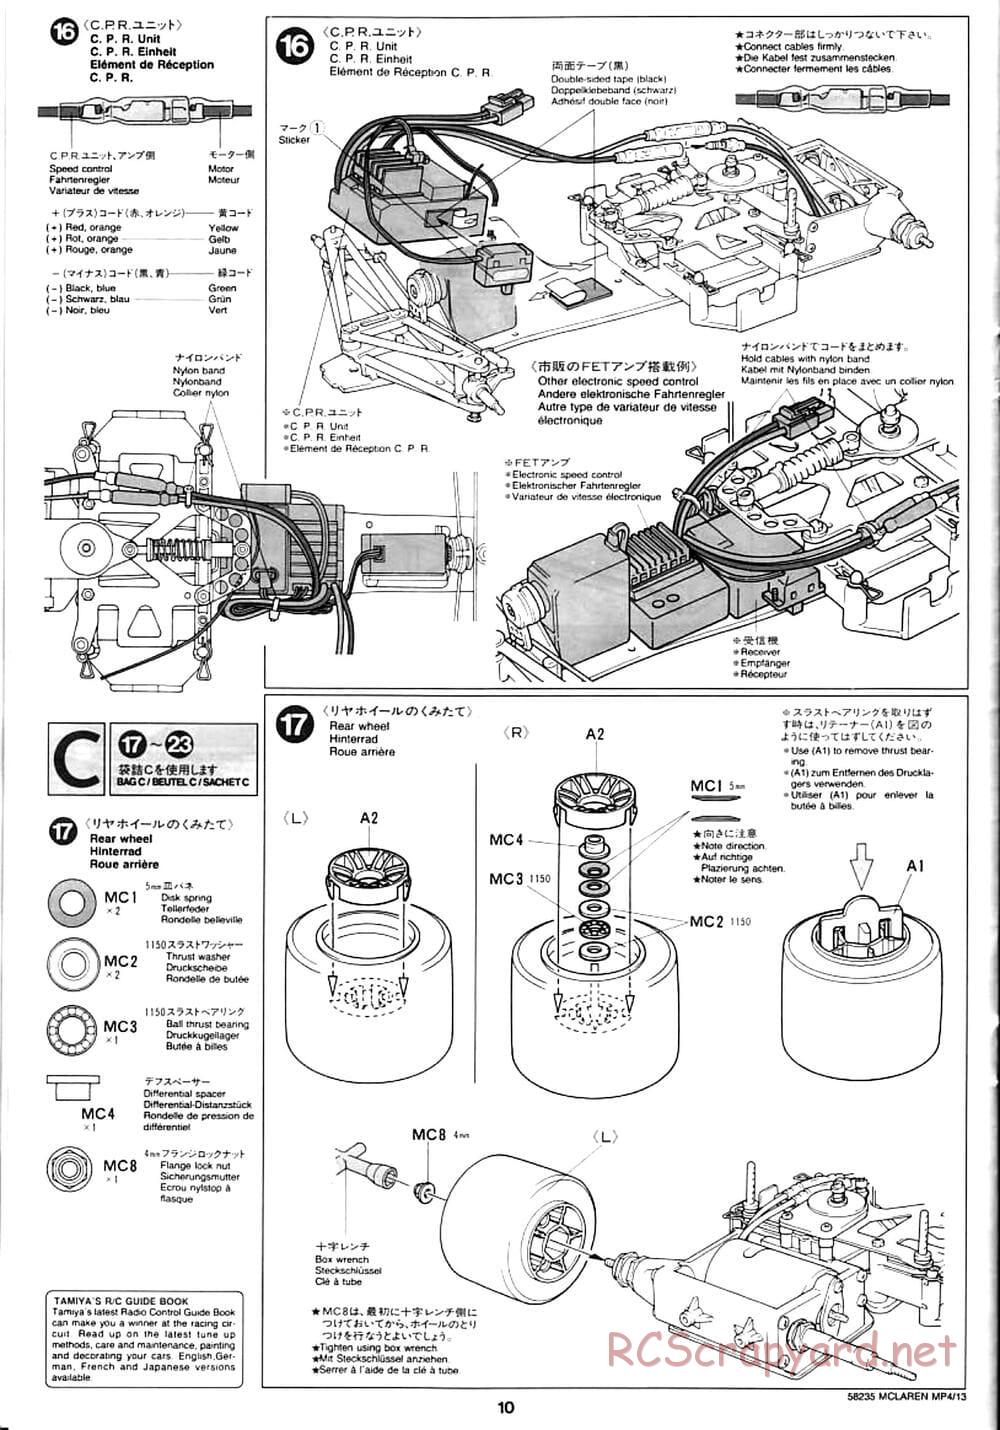 Tamiya - McLaren Mercedes MP4/13 - F103RS Chassis - Manual - Page 10